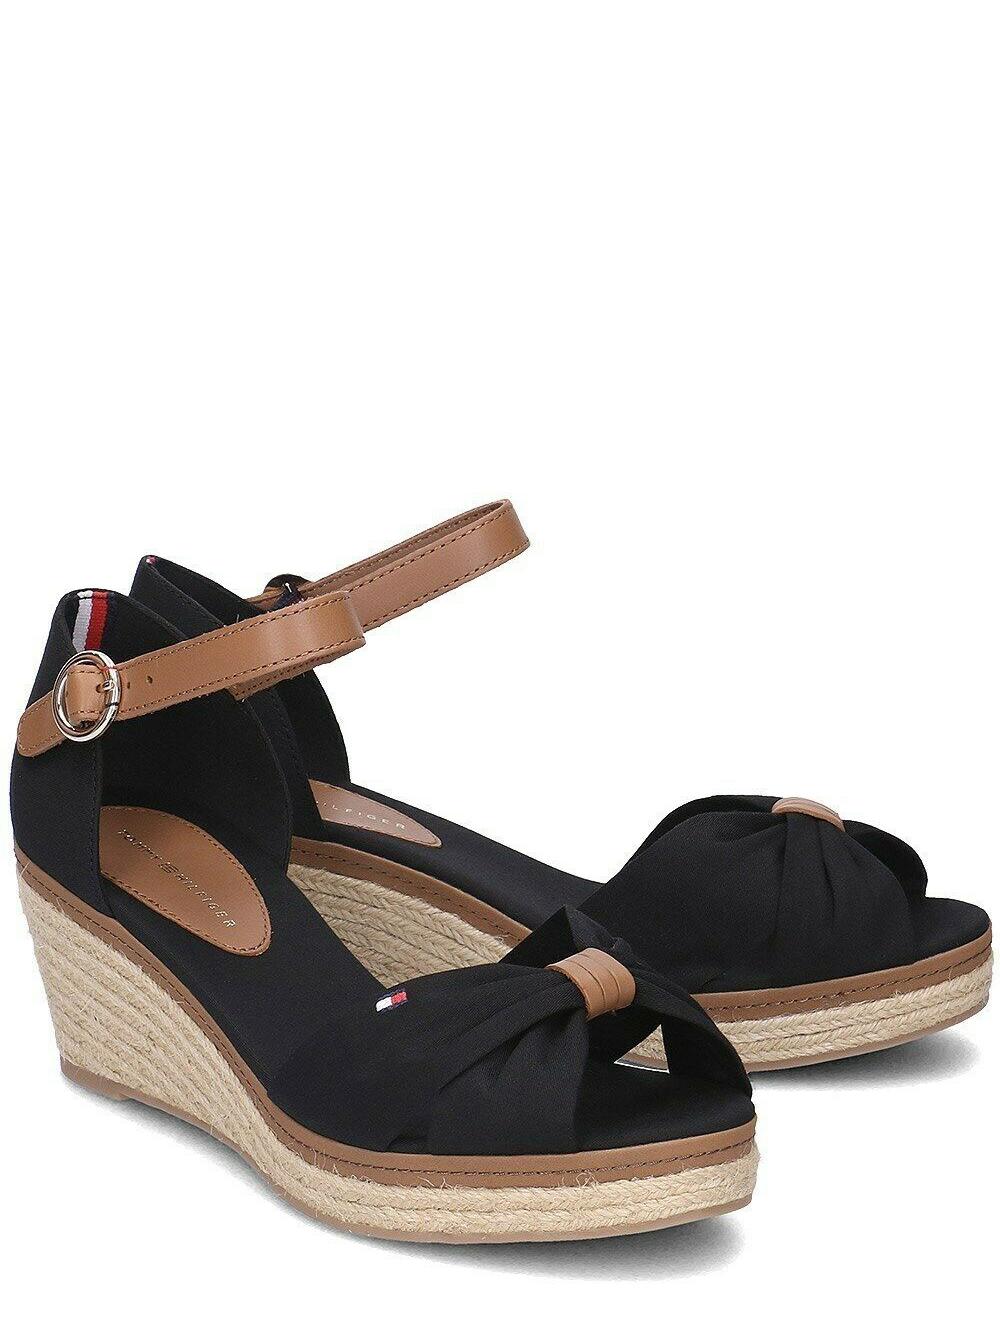 Hilfiger Iconic Elba Open Sandals Black B - Buy Outlet Prices!